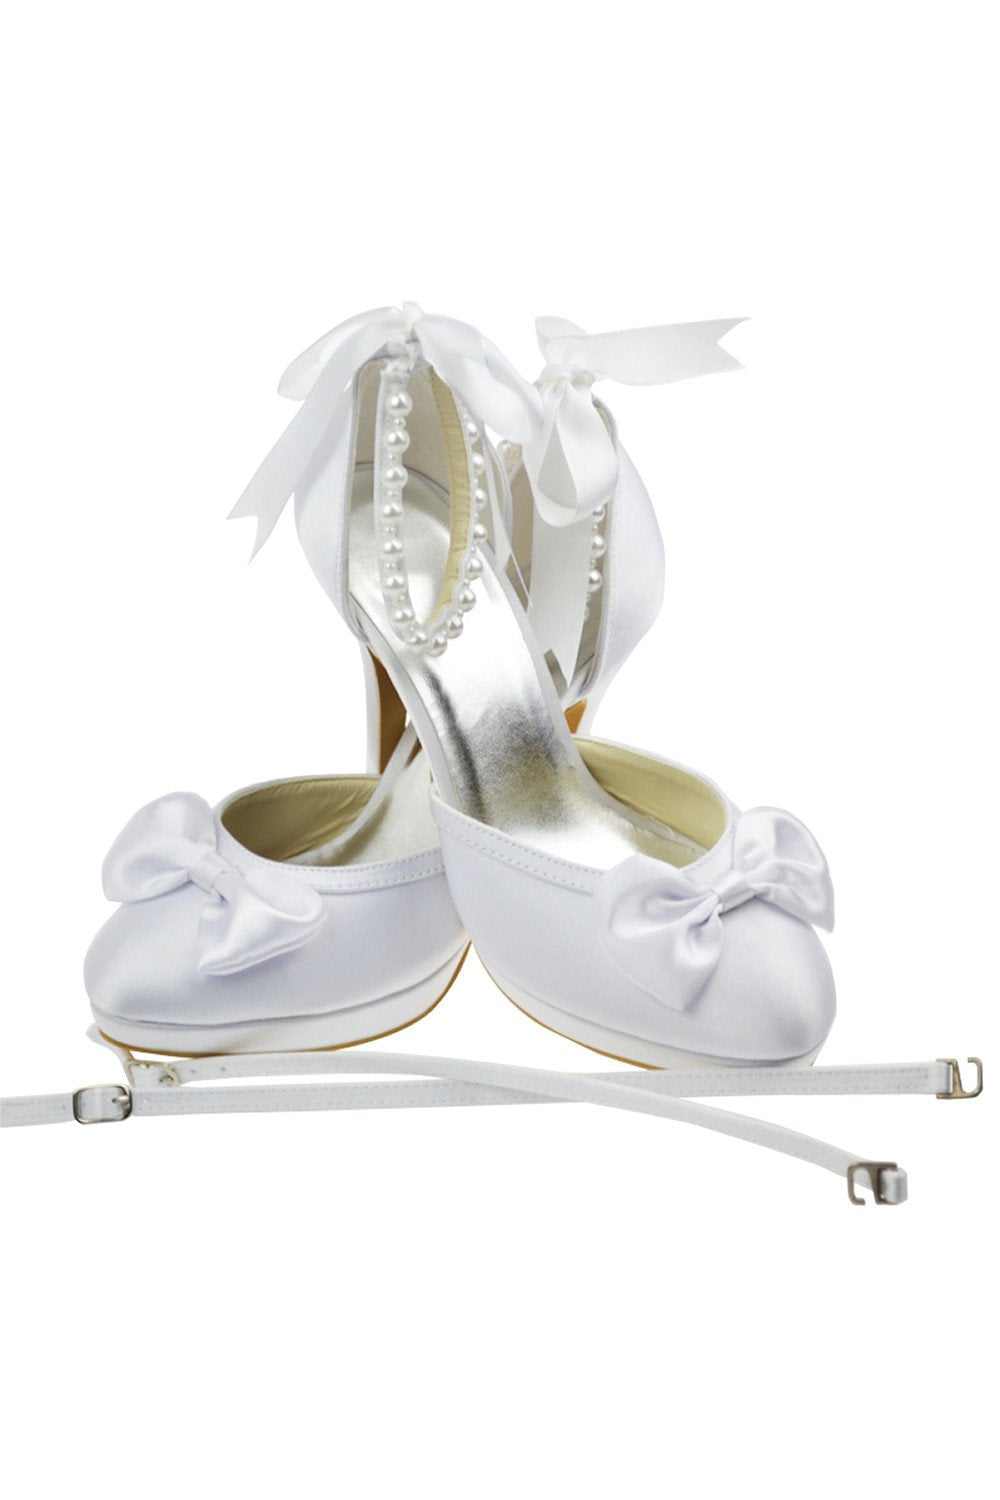 Hand Made Wedding Party Shoes Woman Heels On Sale L-016